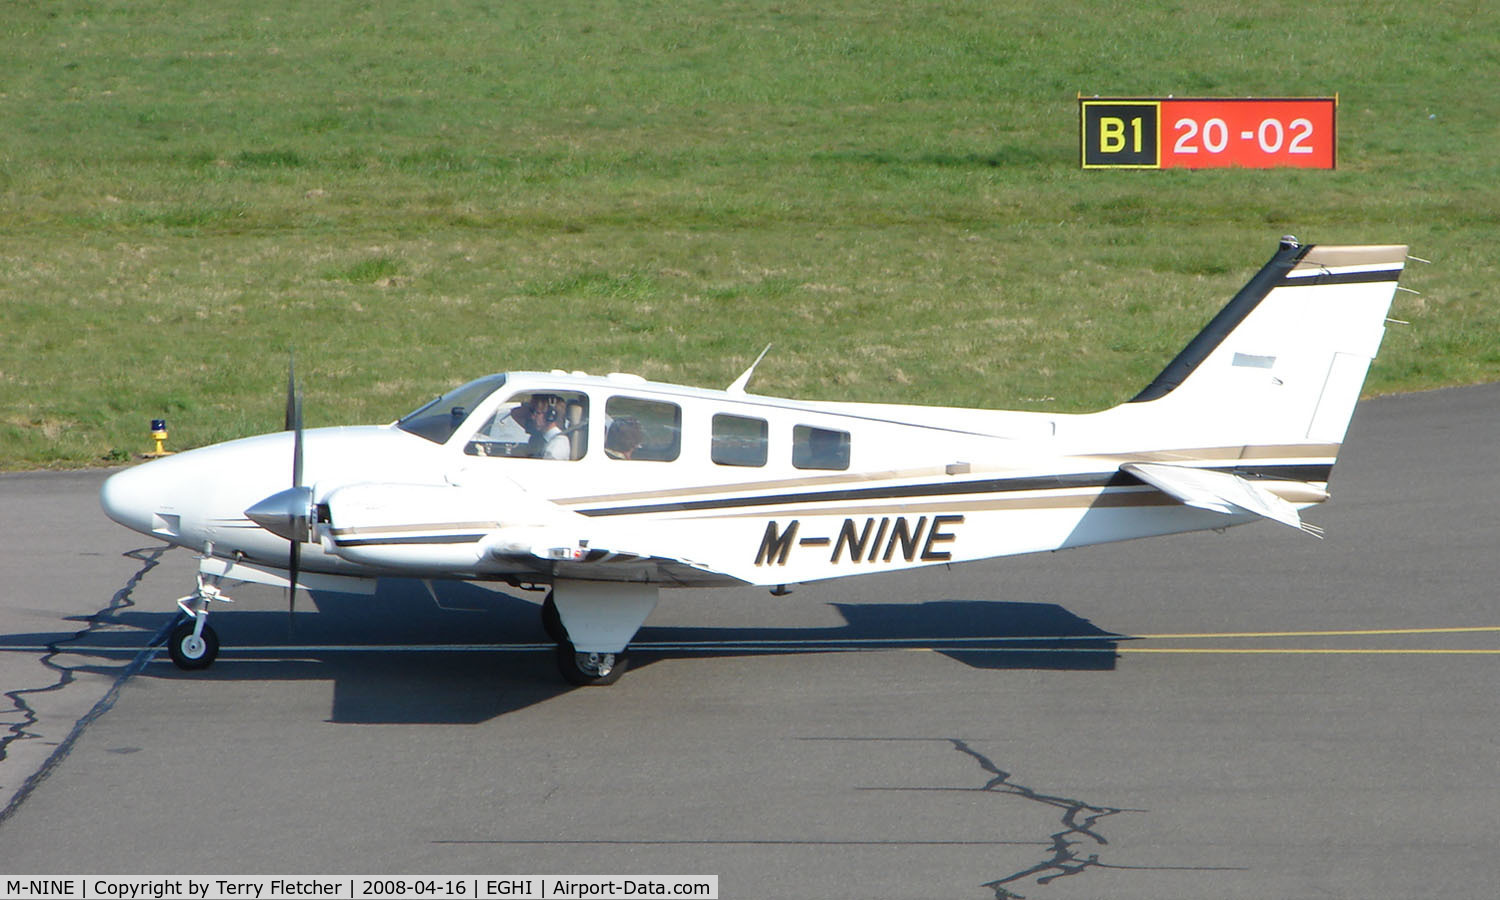 M-NINE, 2007 Beechcraft G58 C/N TH-2203, Beech 58G Baron taxies in at Southampton in April 2008